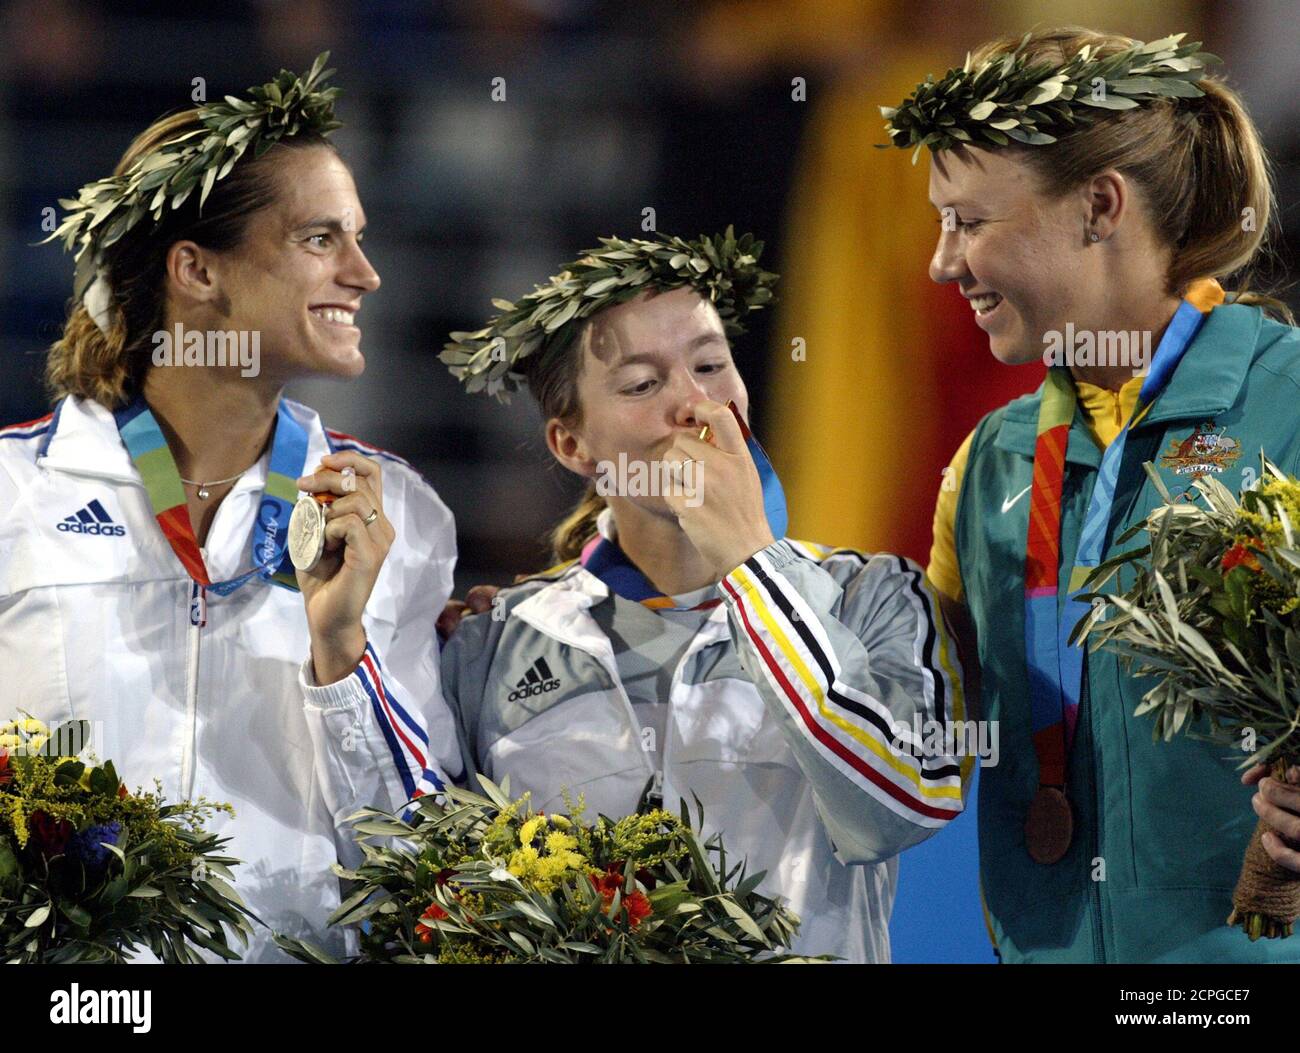 Gold medallist Henin-Hardenne kisses the medal while silver medallist Mauresmo and bronze medallist Molik watch after the ceremony for the women's single tennis event of Athens 2004 Olympic Games.  Gold medallist Belgium's Justine Henin-Hardenne (C) kisses the medal while silver medallist France's Amelie Mauresmo (L) and bronze medallist Australia's Alicia Molik (R) watch after the ceremony for the women's single tennis event of Athens 2004 Olympic Games August 21, 2004. REUTERS/Carlos Barria Stock Photo